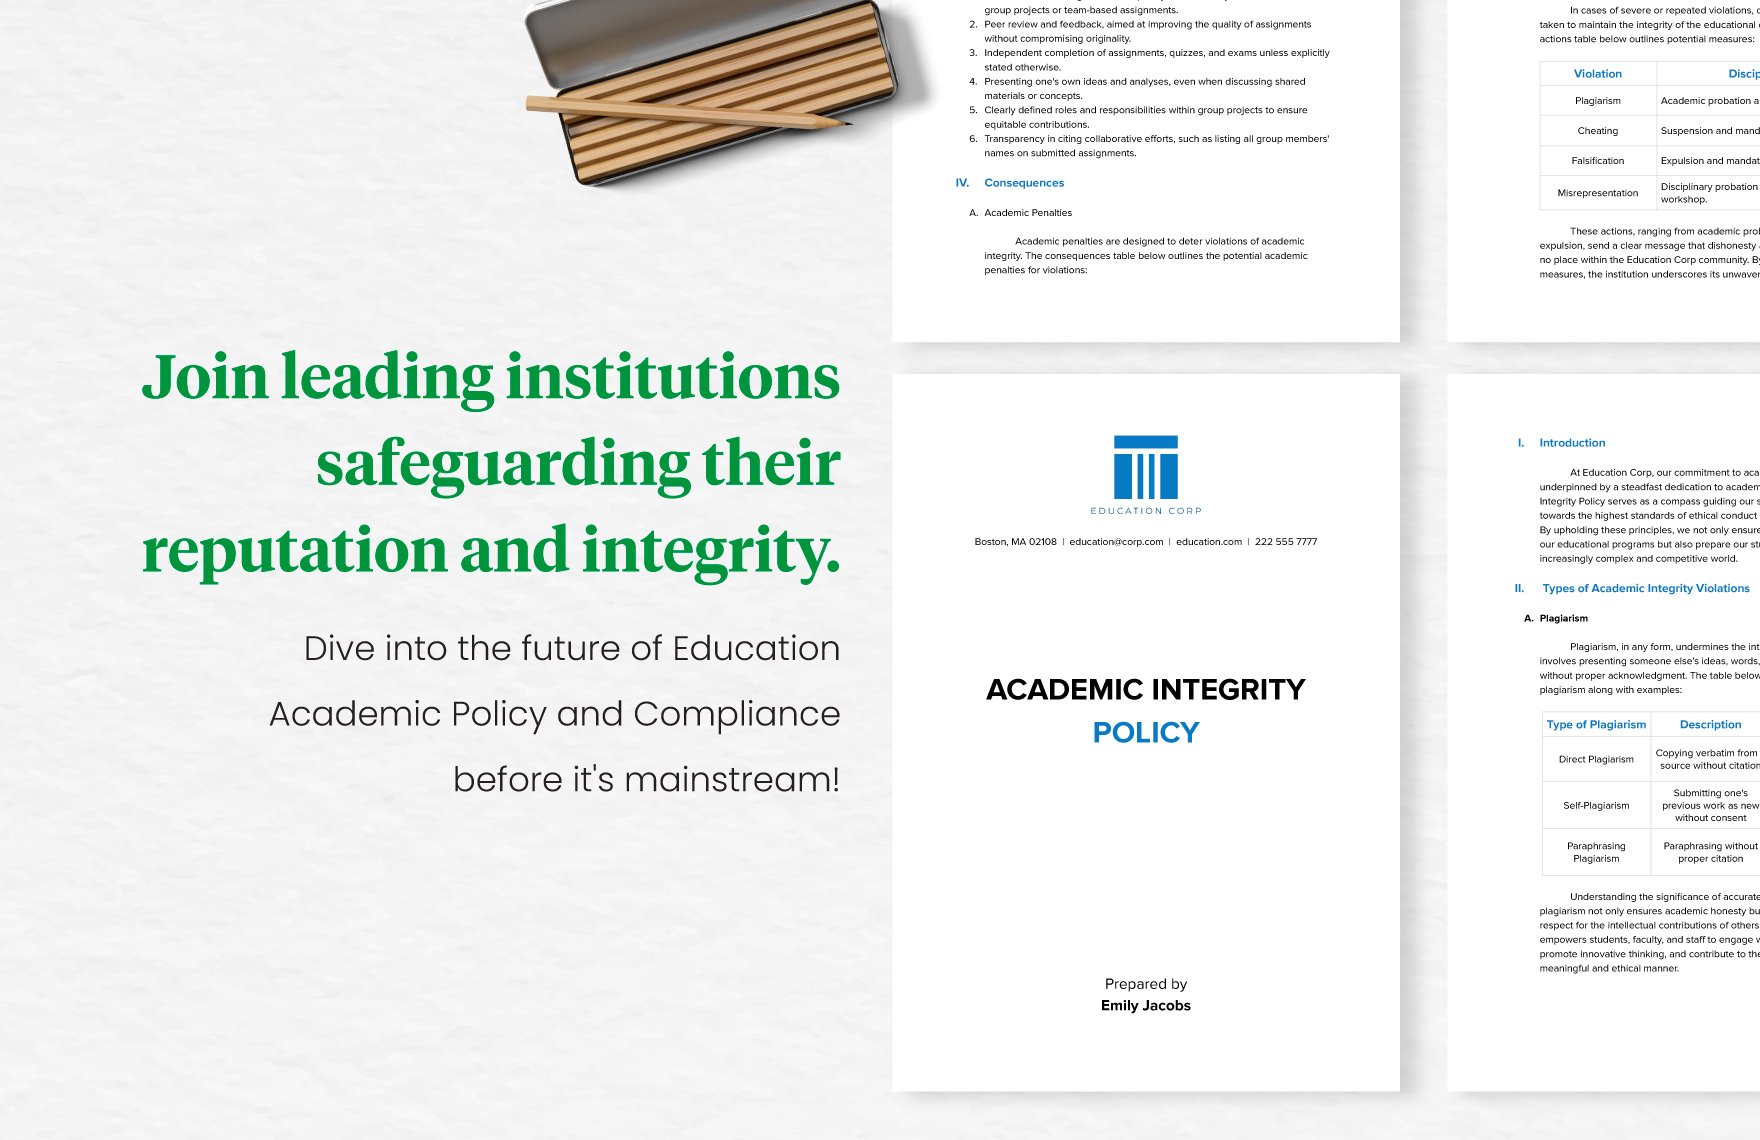 Academic Integrity Policy Template